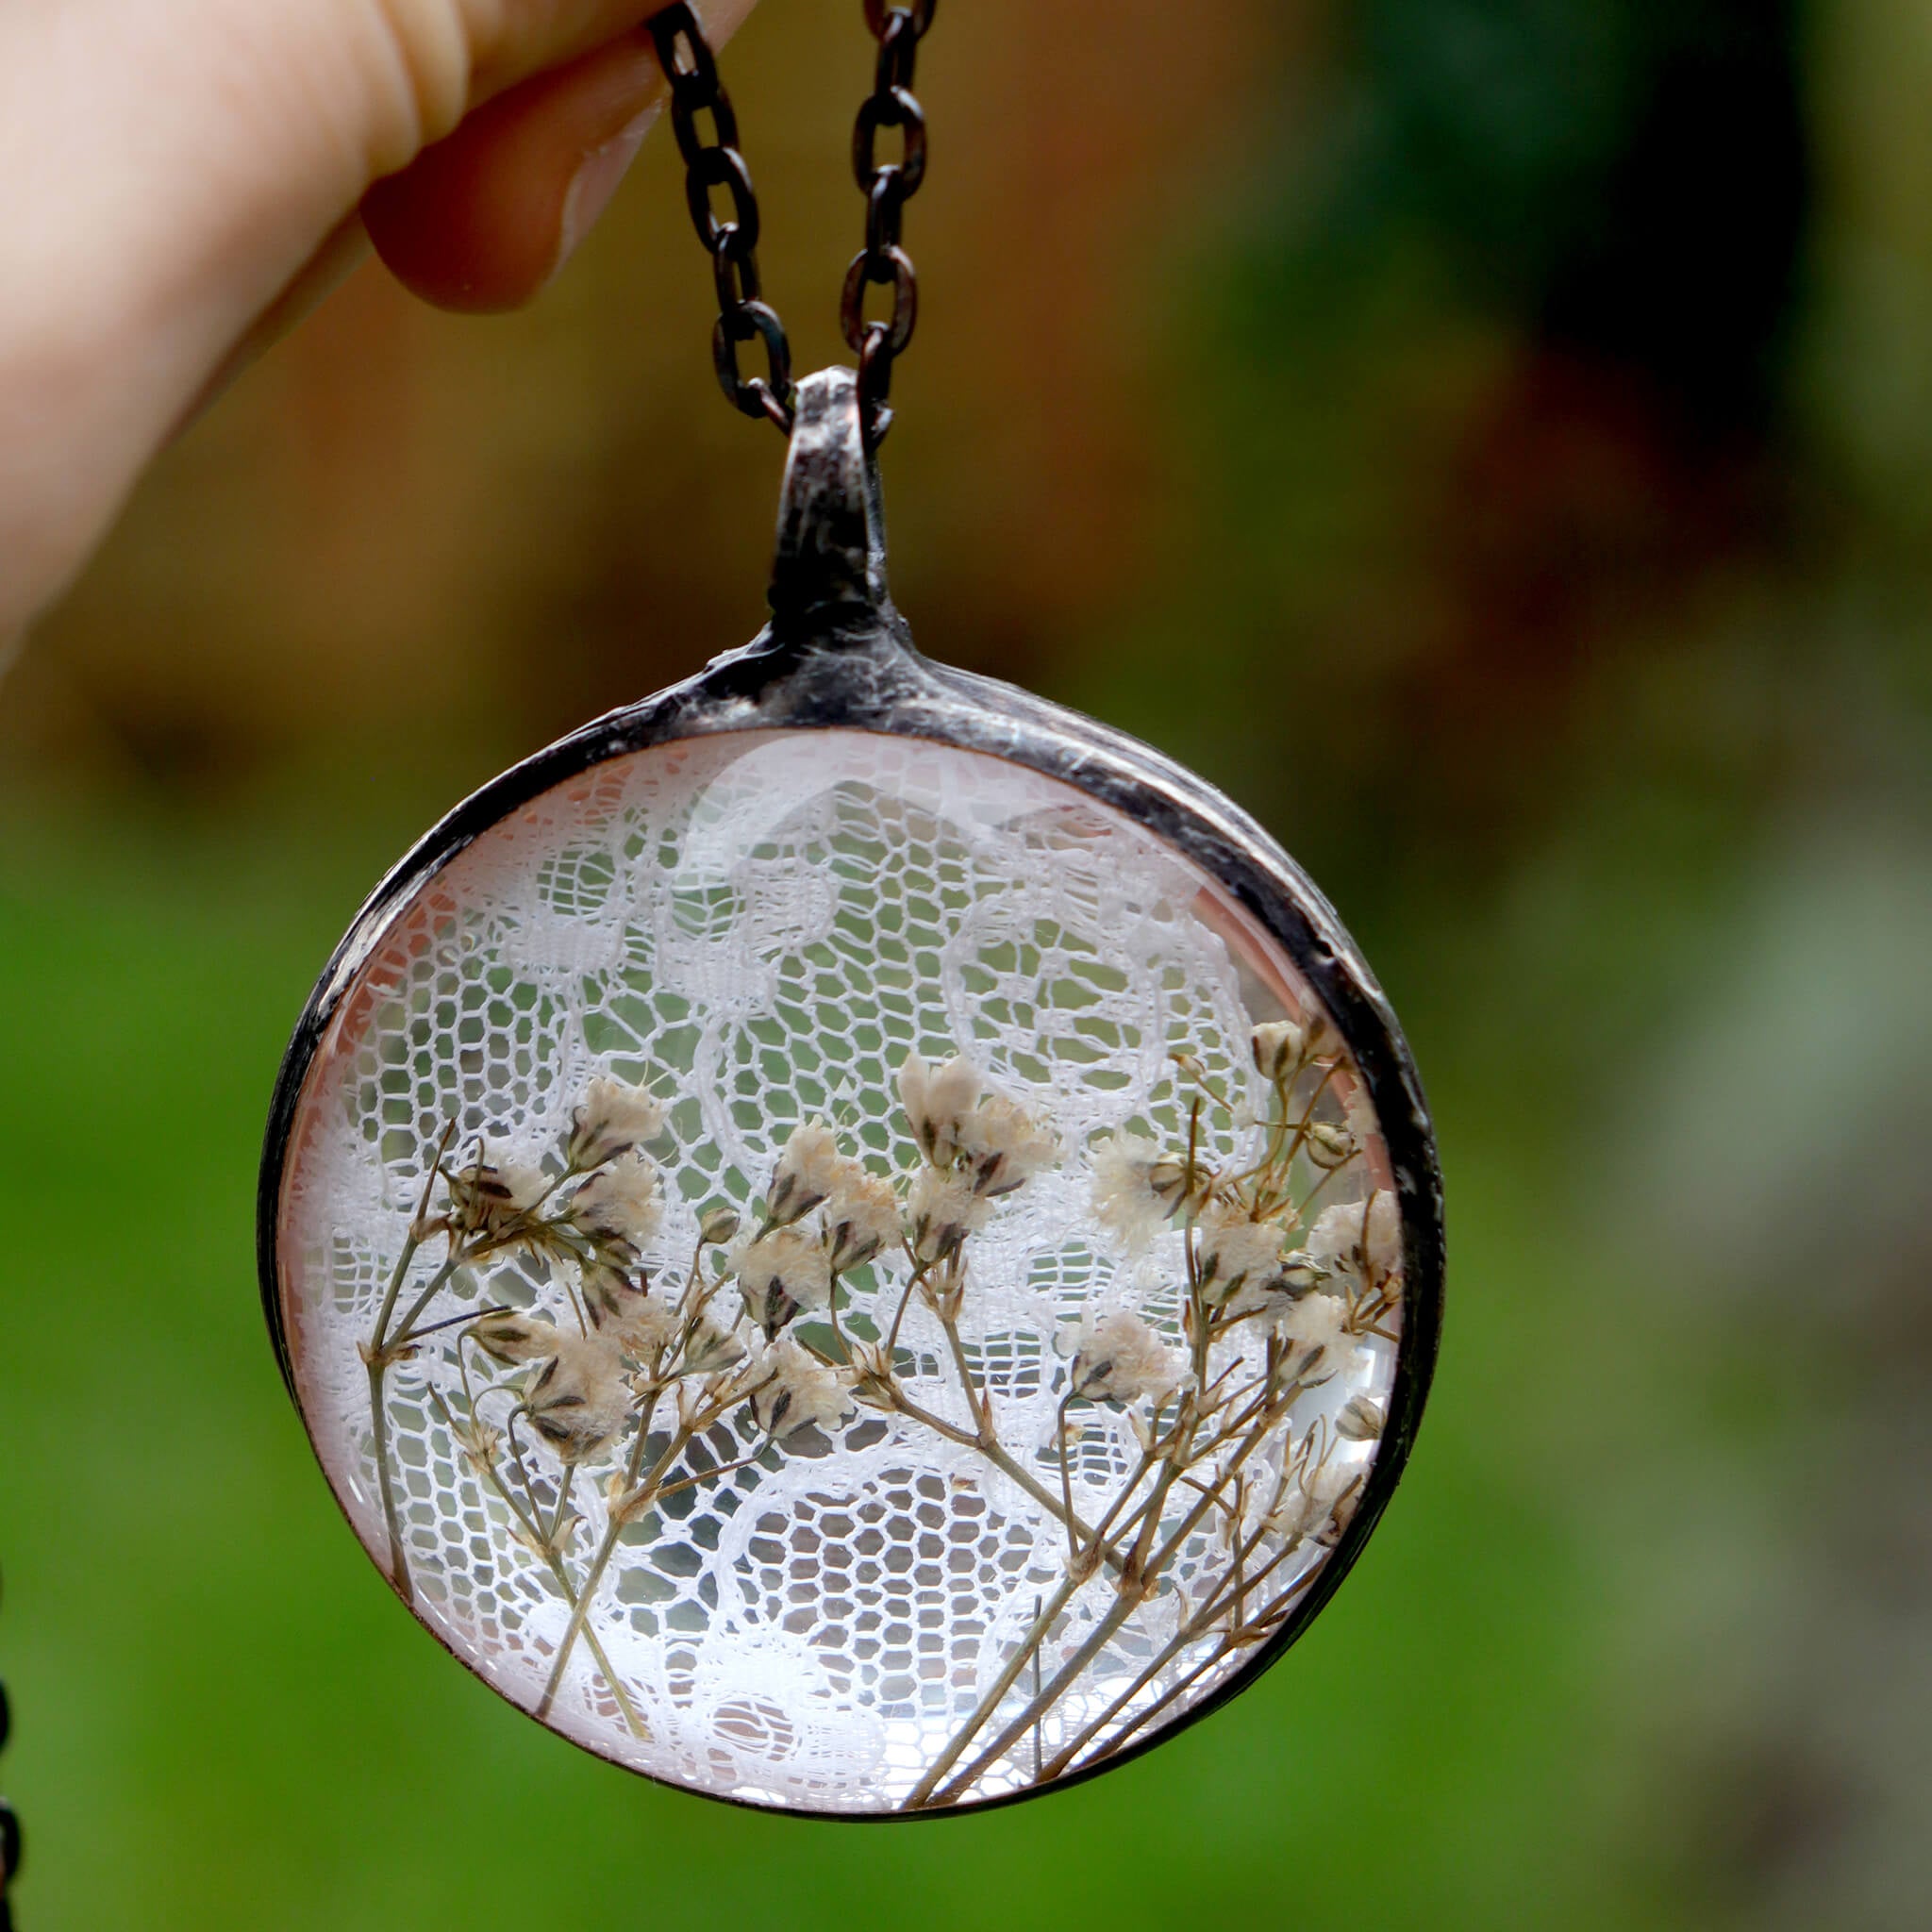 Pressed flowers in a stained glass necklace hold in hand hanging on a green background